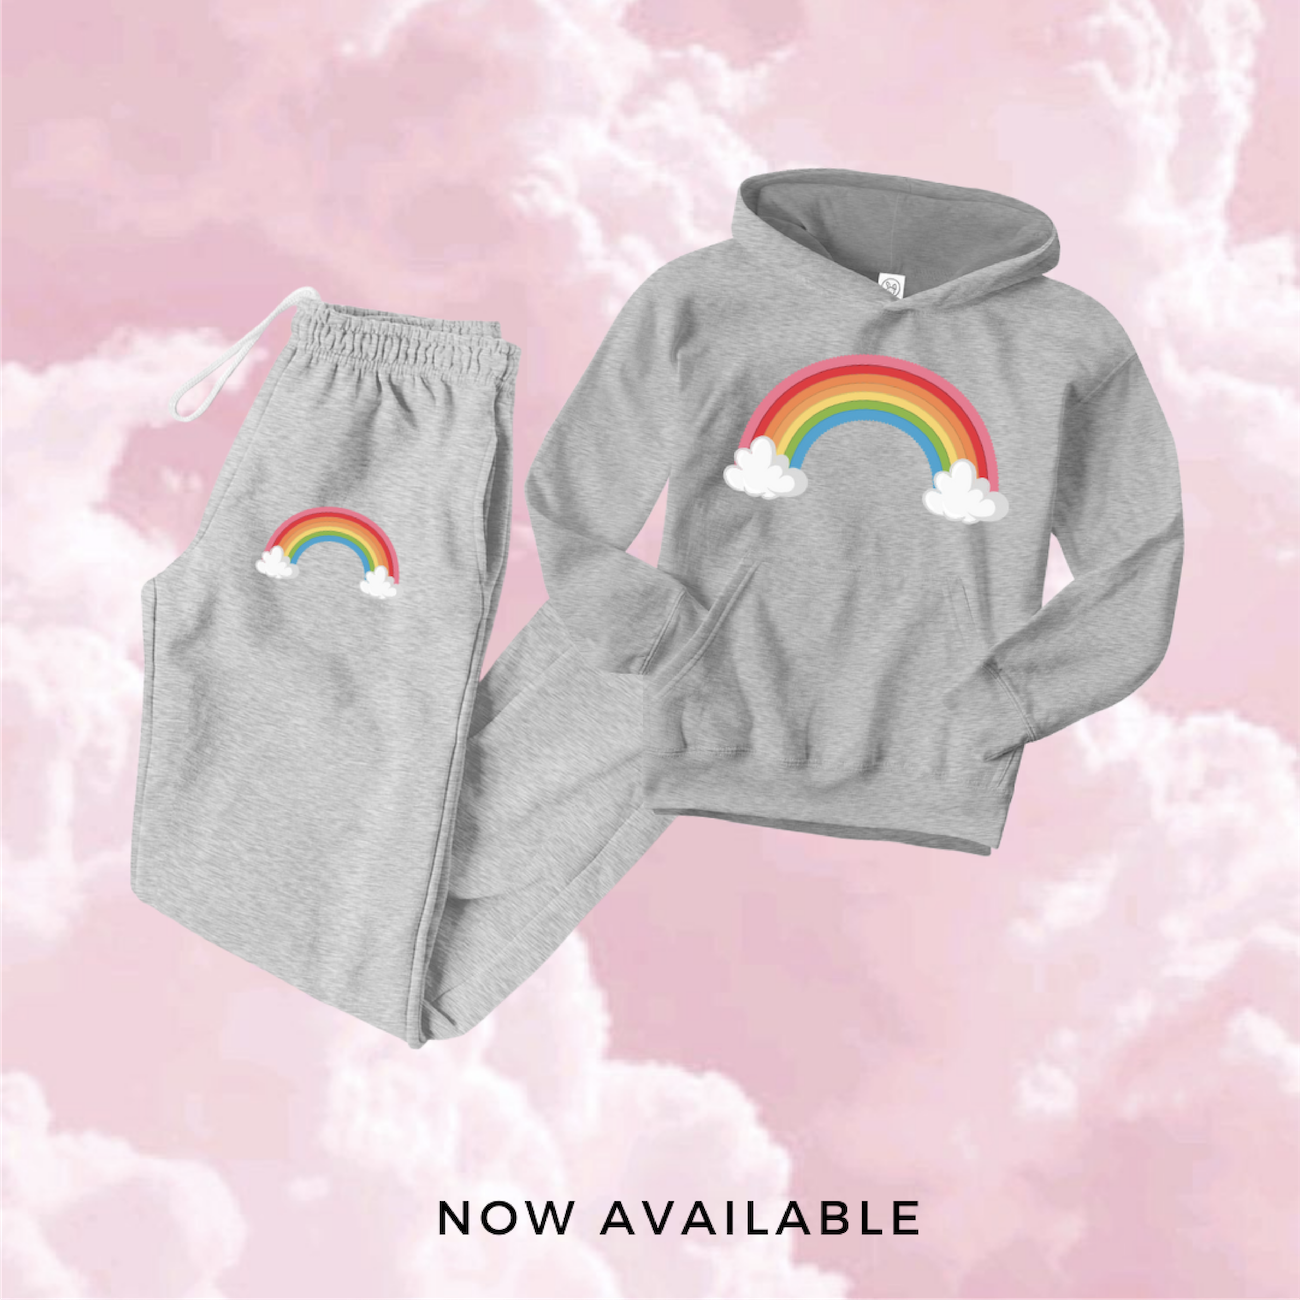 Rainbows & Clouds Collection from Jenni 'JWoww' Farley's store Heavenly Flower